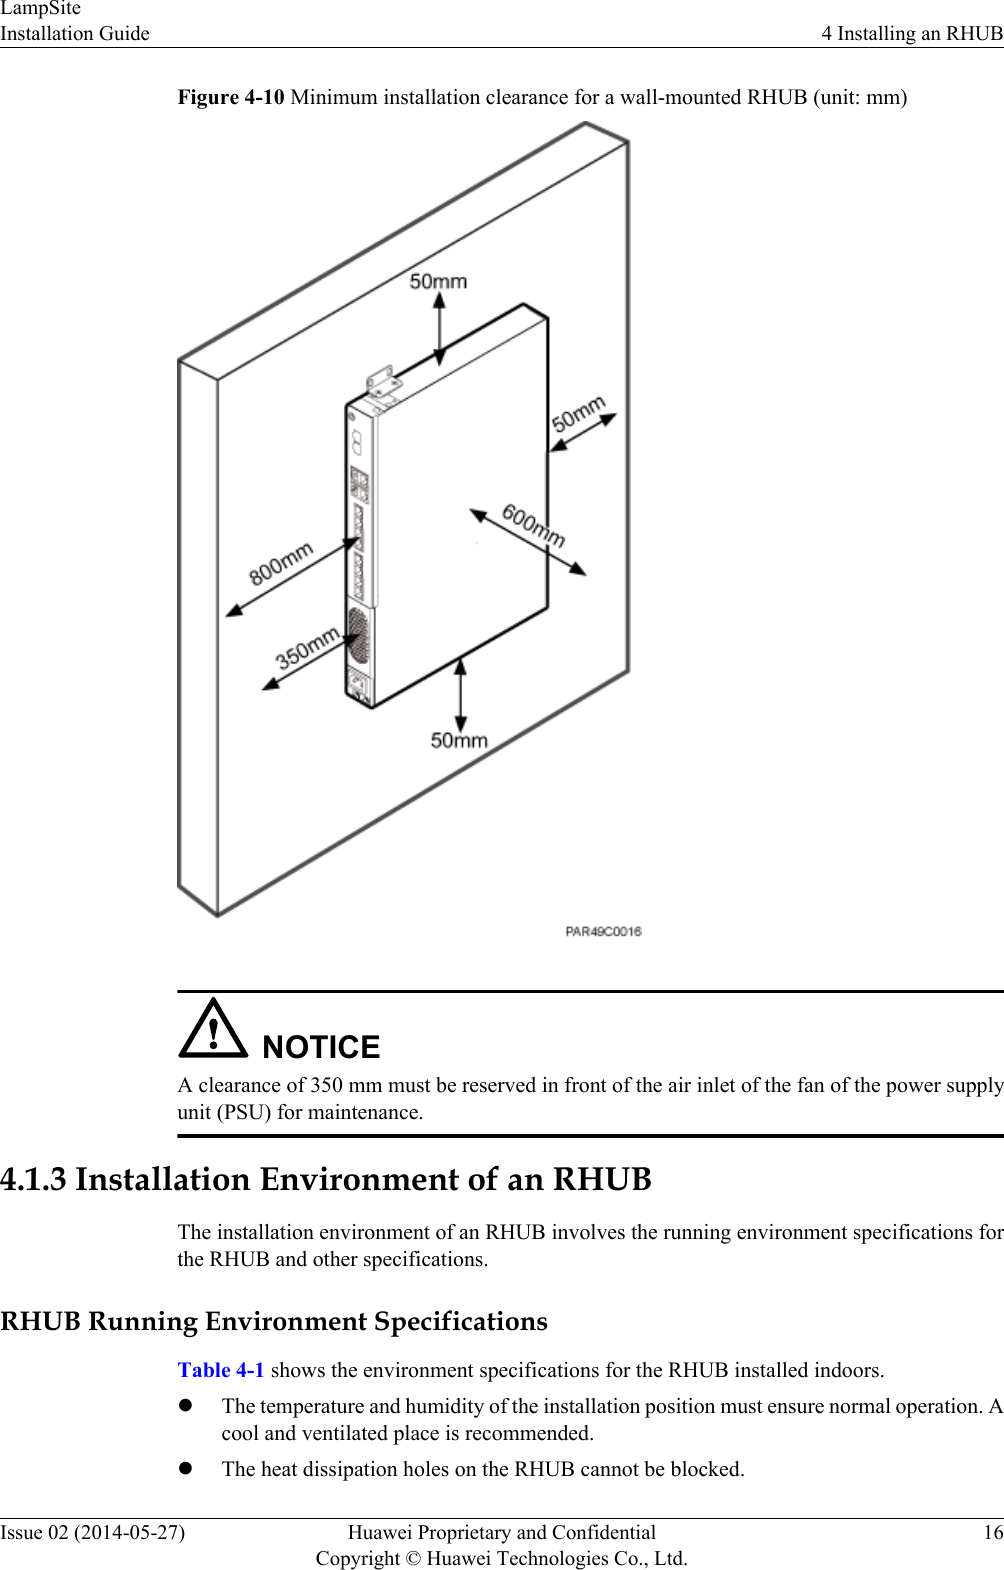 Figure 4-10 Minimum installation clearance for a wall-mounted RHUB (unit: mm)NOTICEA clearance of 350 mm must be reserved in front of the air inlet of the fan of the power supplyunit (PSU) for maintenance.4.1.3 Installation Environment of an RHUBThe installation environment of an RHUB involves the running environment specifications forthe RHUB and other specifications.RHUB Running Environment SpecificationsTable 4-1 shows the environment specifications for the RHUB installed indoors.lThe temperature and humidity of the installation position must ensure normal operation. Acool and ventilated place is recommended.lThe heat dissipation holes on the RHUB cannot be blocked.LampSiteInstallation Guide 4 Installing an RHUBIssue 02 (2014-05-27) Huawei Proprietary and ConfidentialCopyright © Huawei Technologies Co., Ltd.16